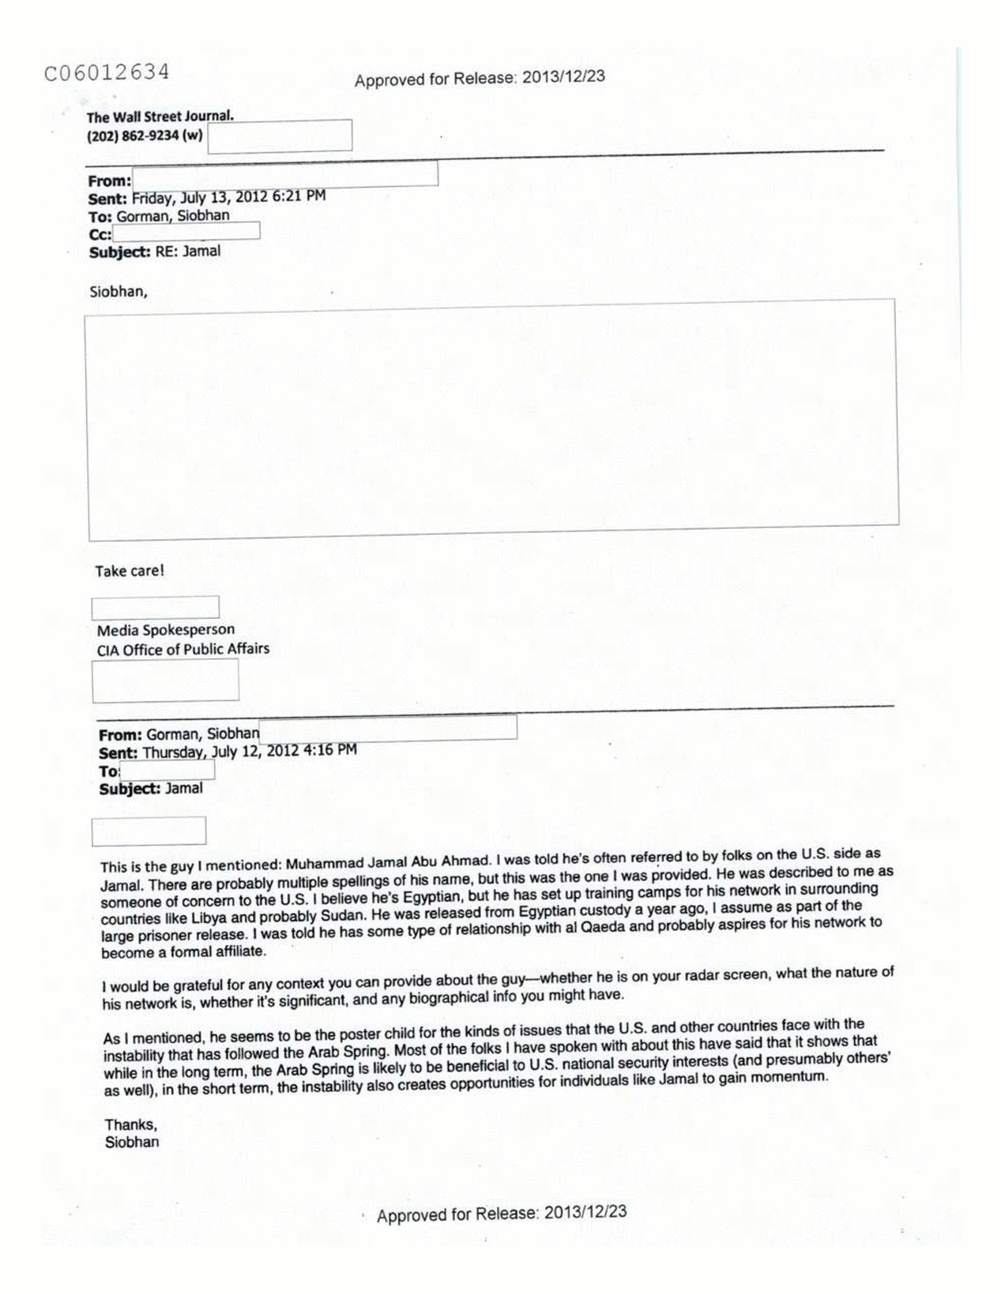 Page 196 from Email Correspondence Between Reporters and CIA Flacks